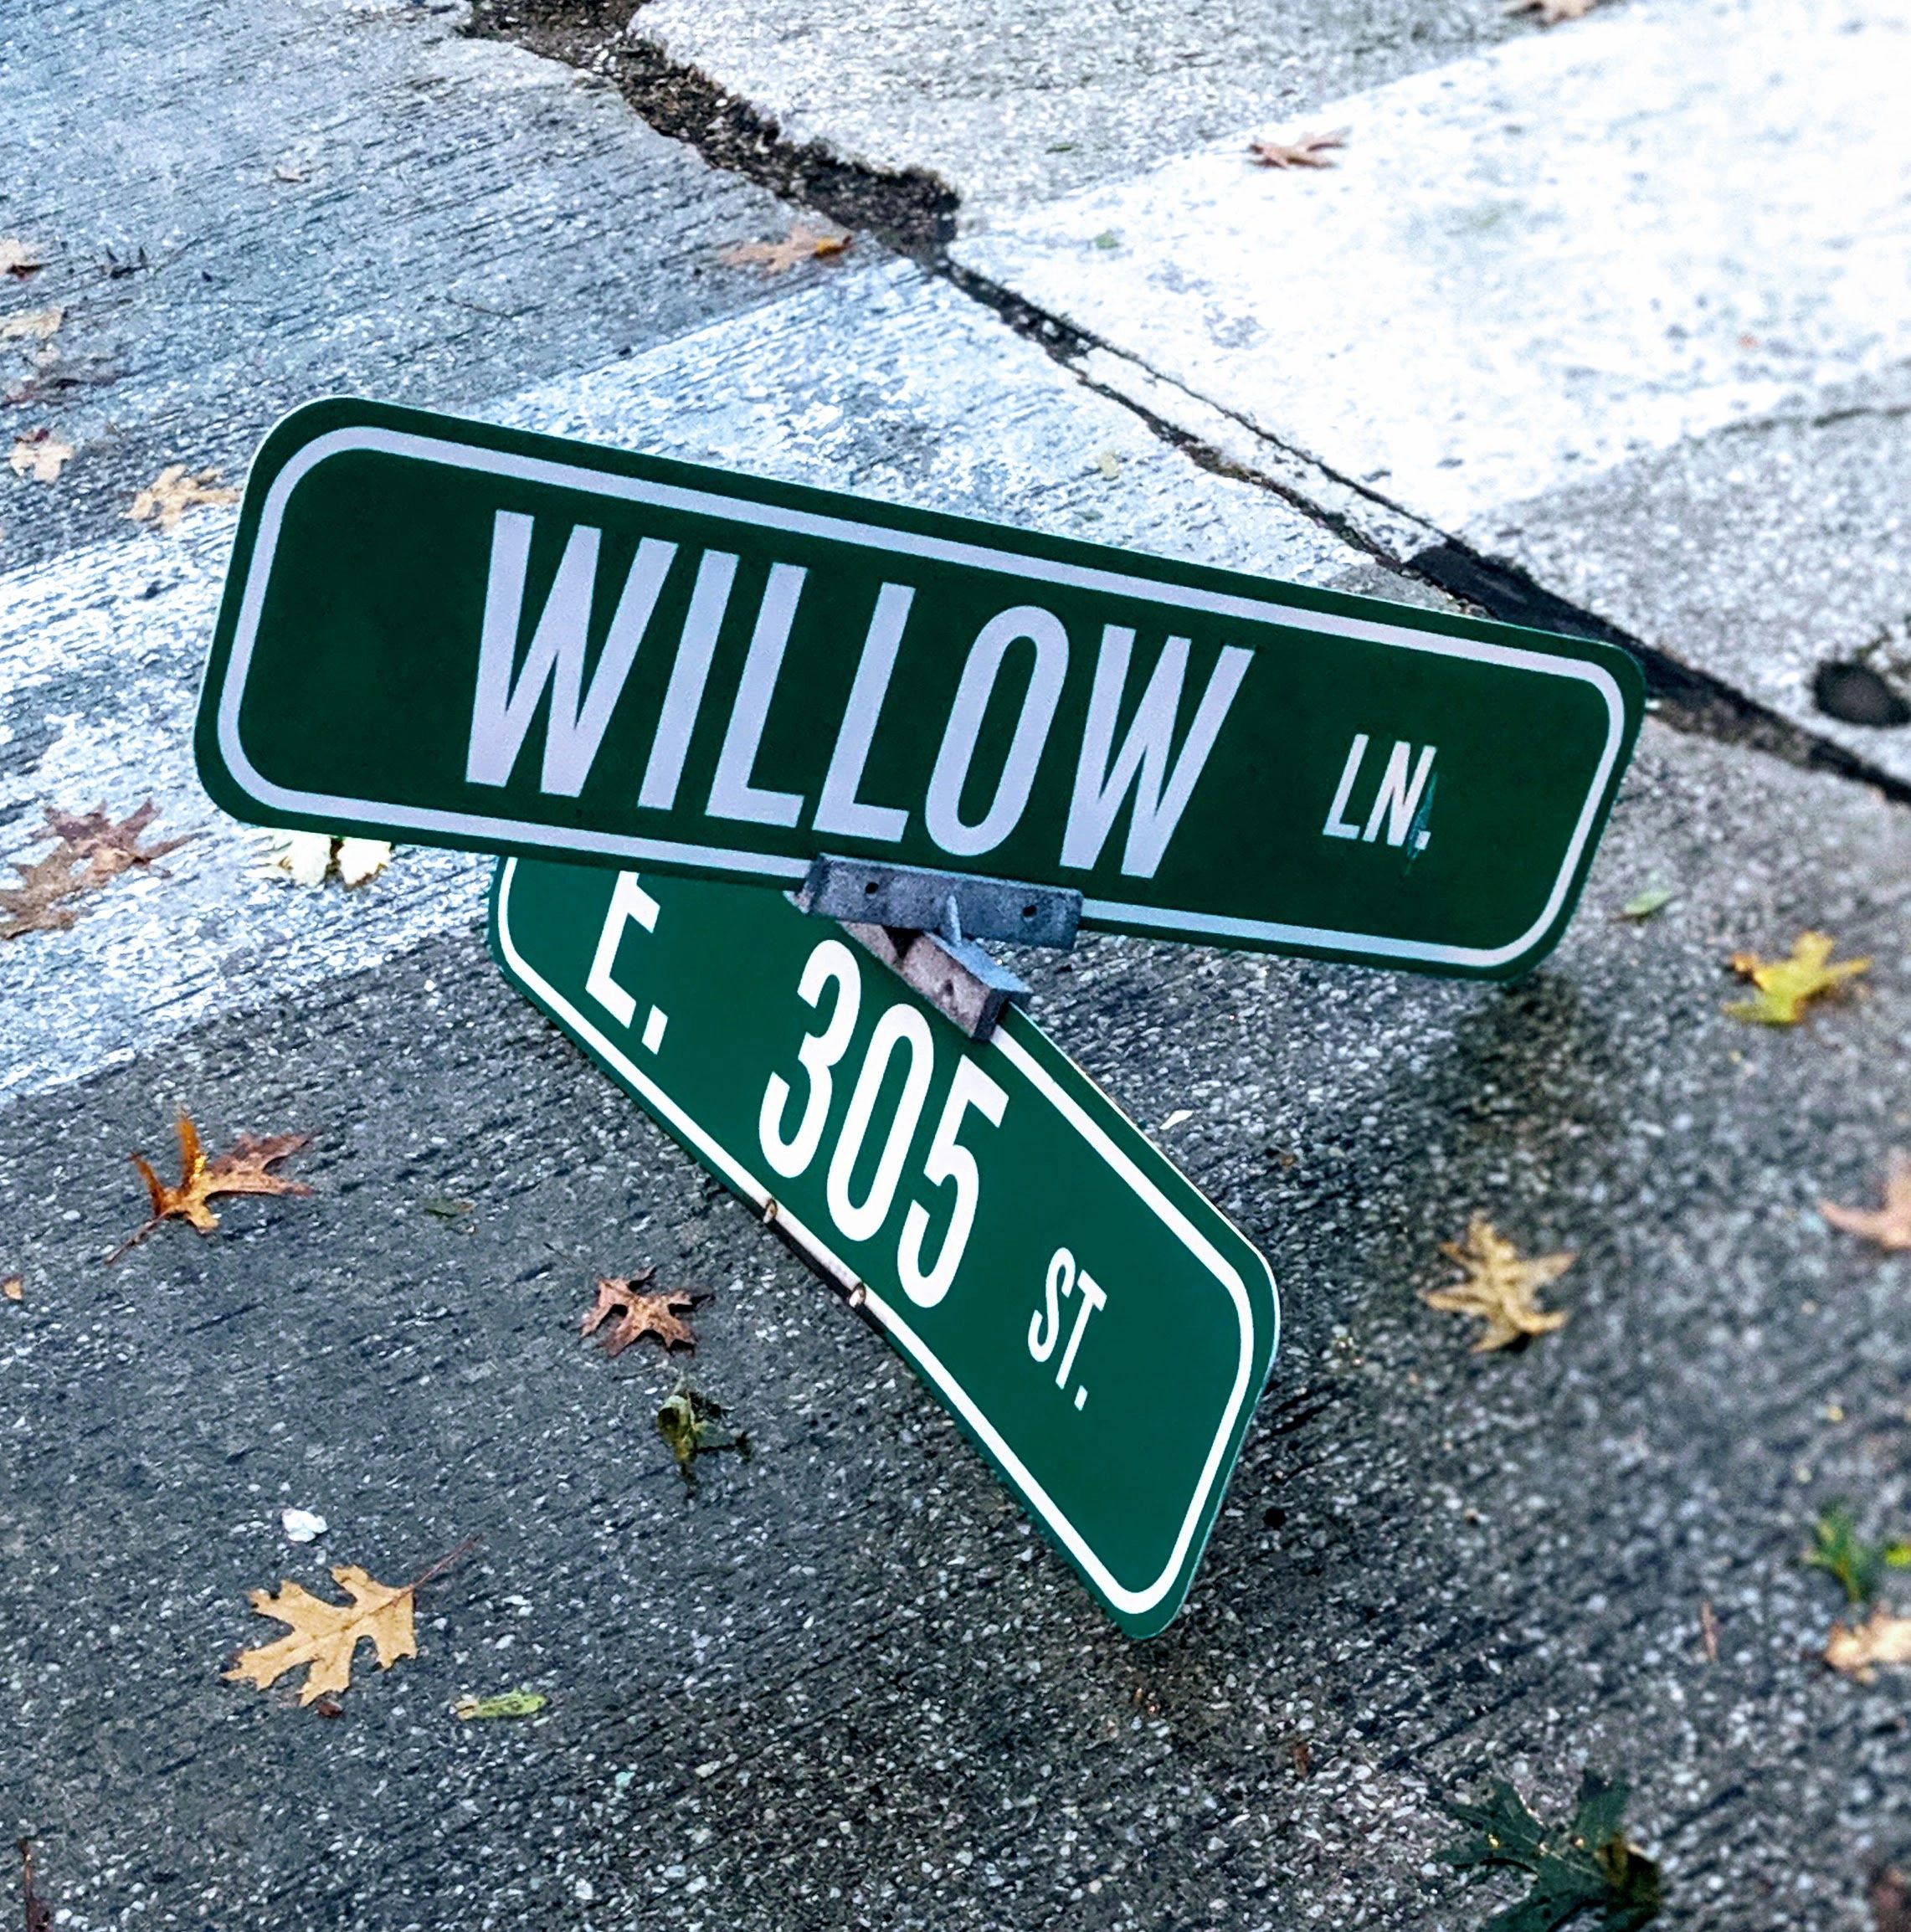 Street sign, Willow ln and E. 305